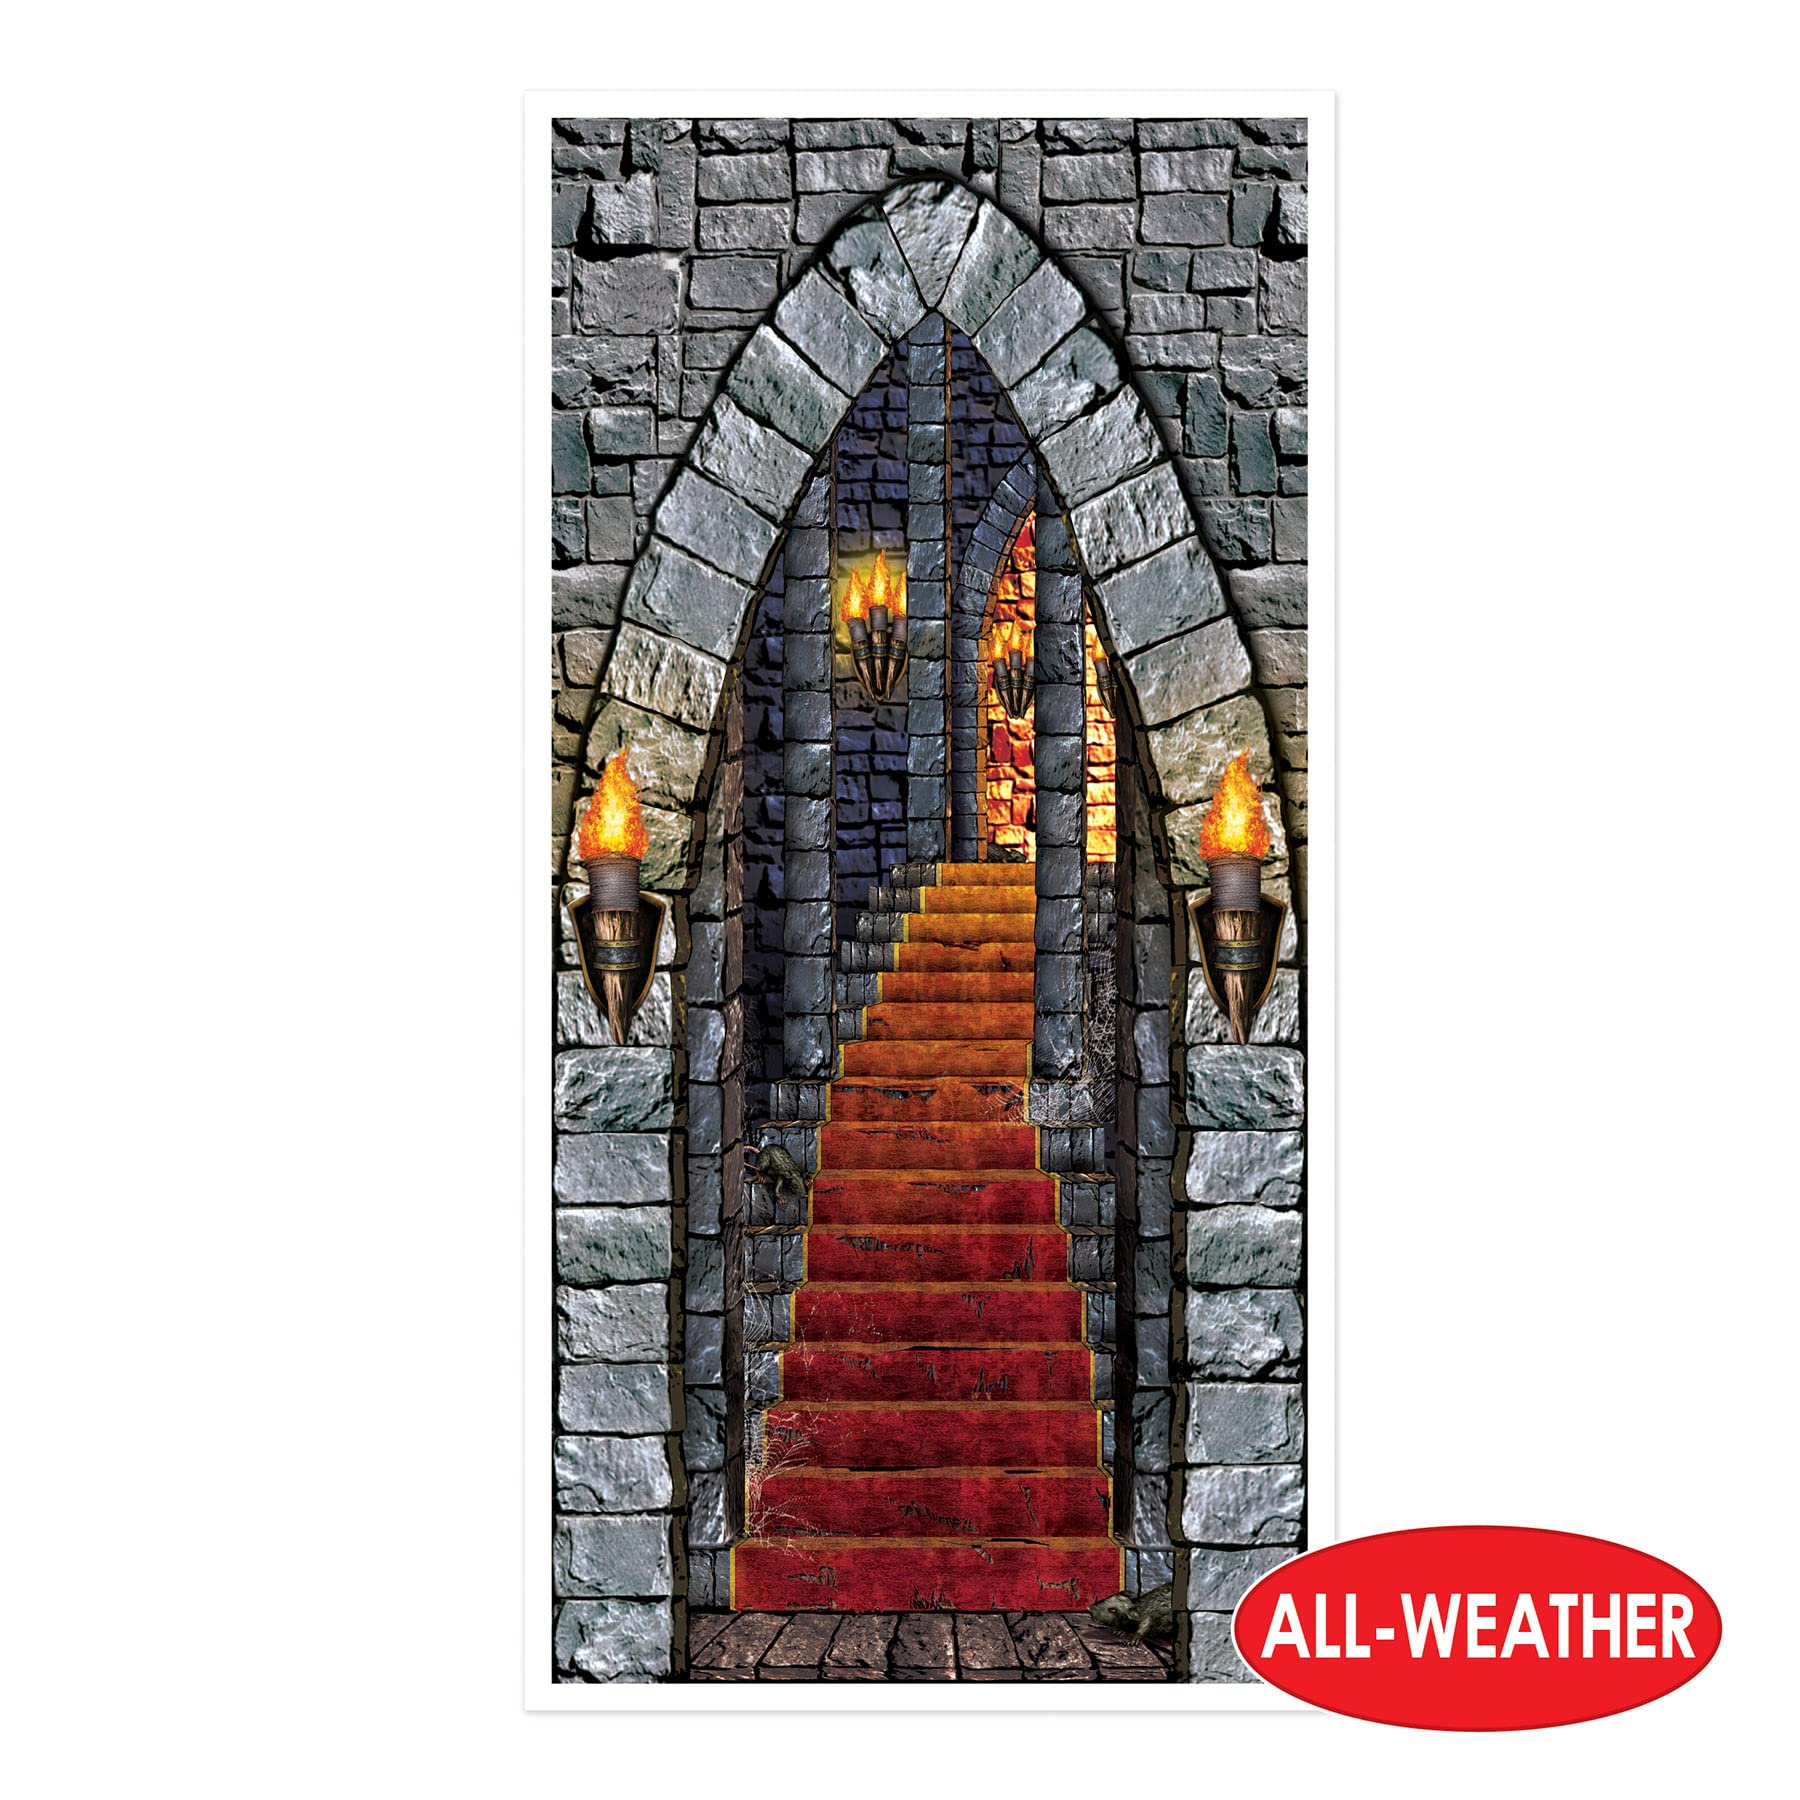 Beistle Indoor/Outdoor Plastic Castle Entrance Door Cover for Medieval Theme Decoration Halloween Party Supplies, 30